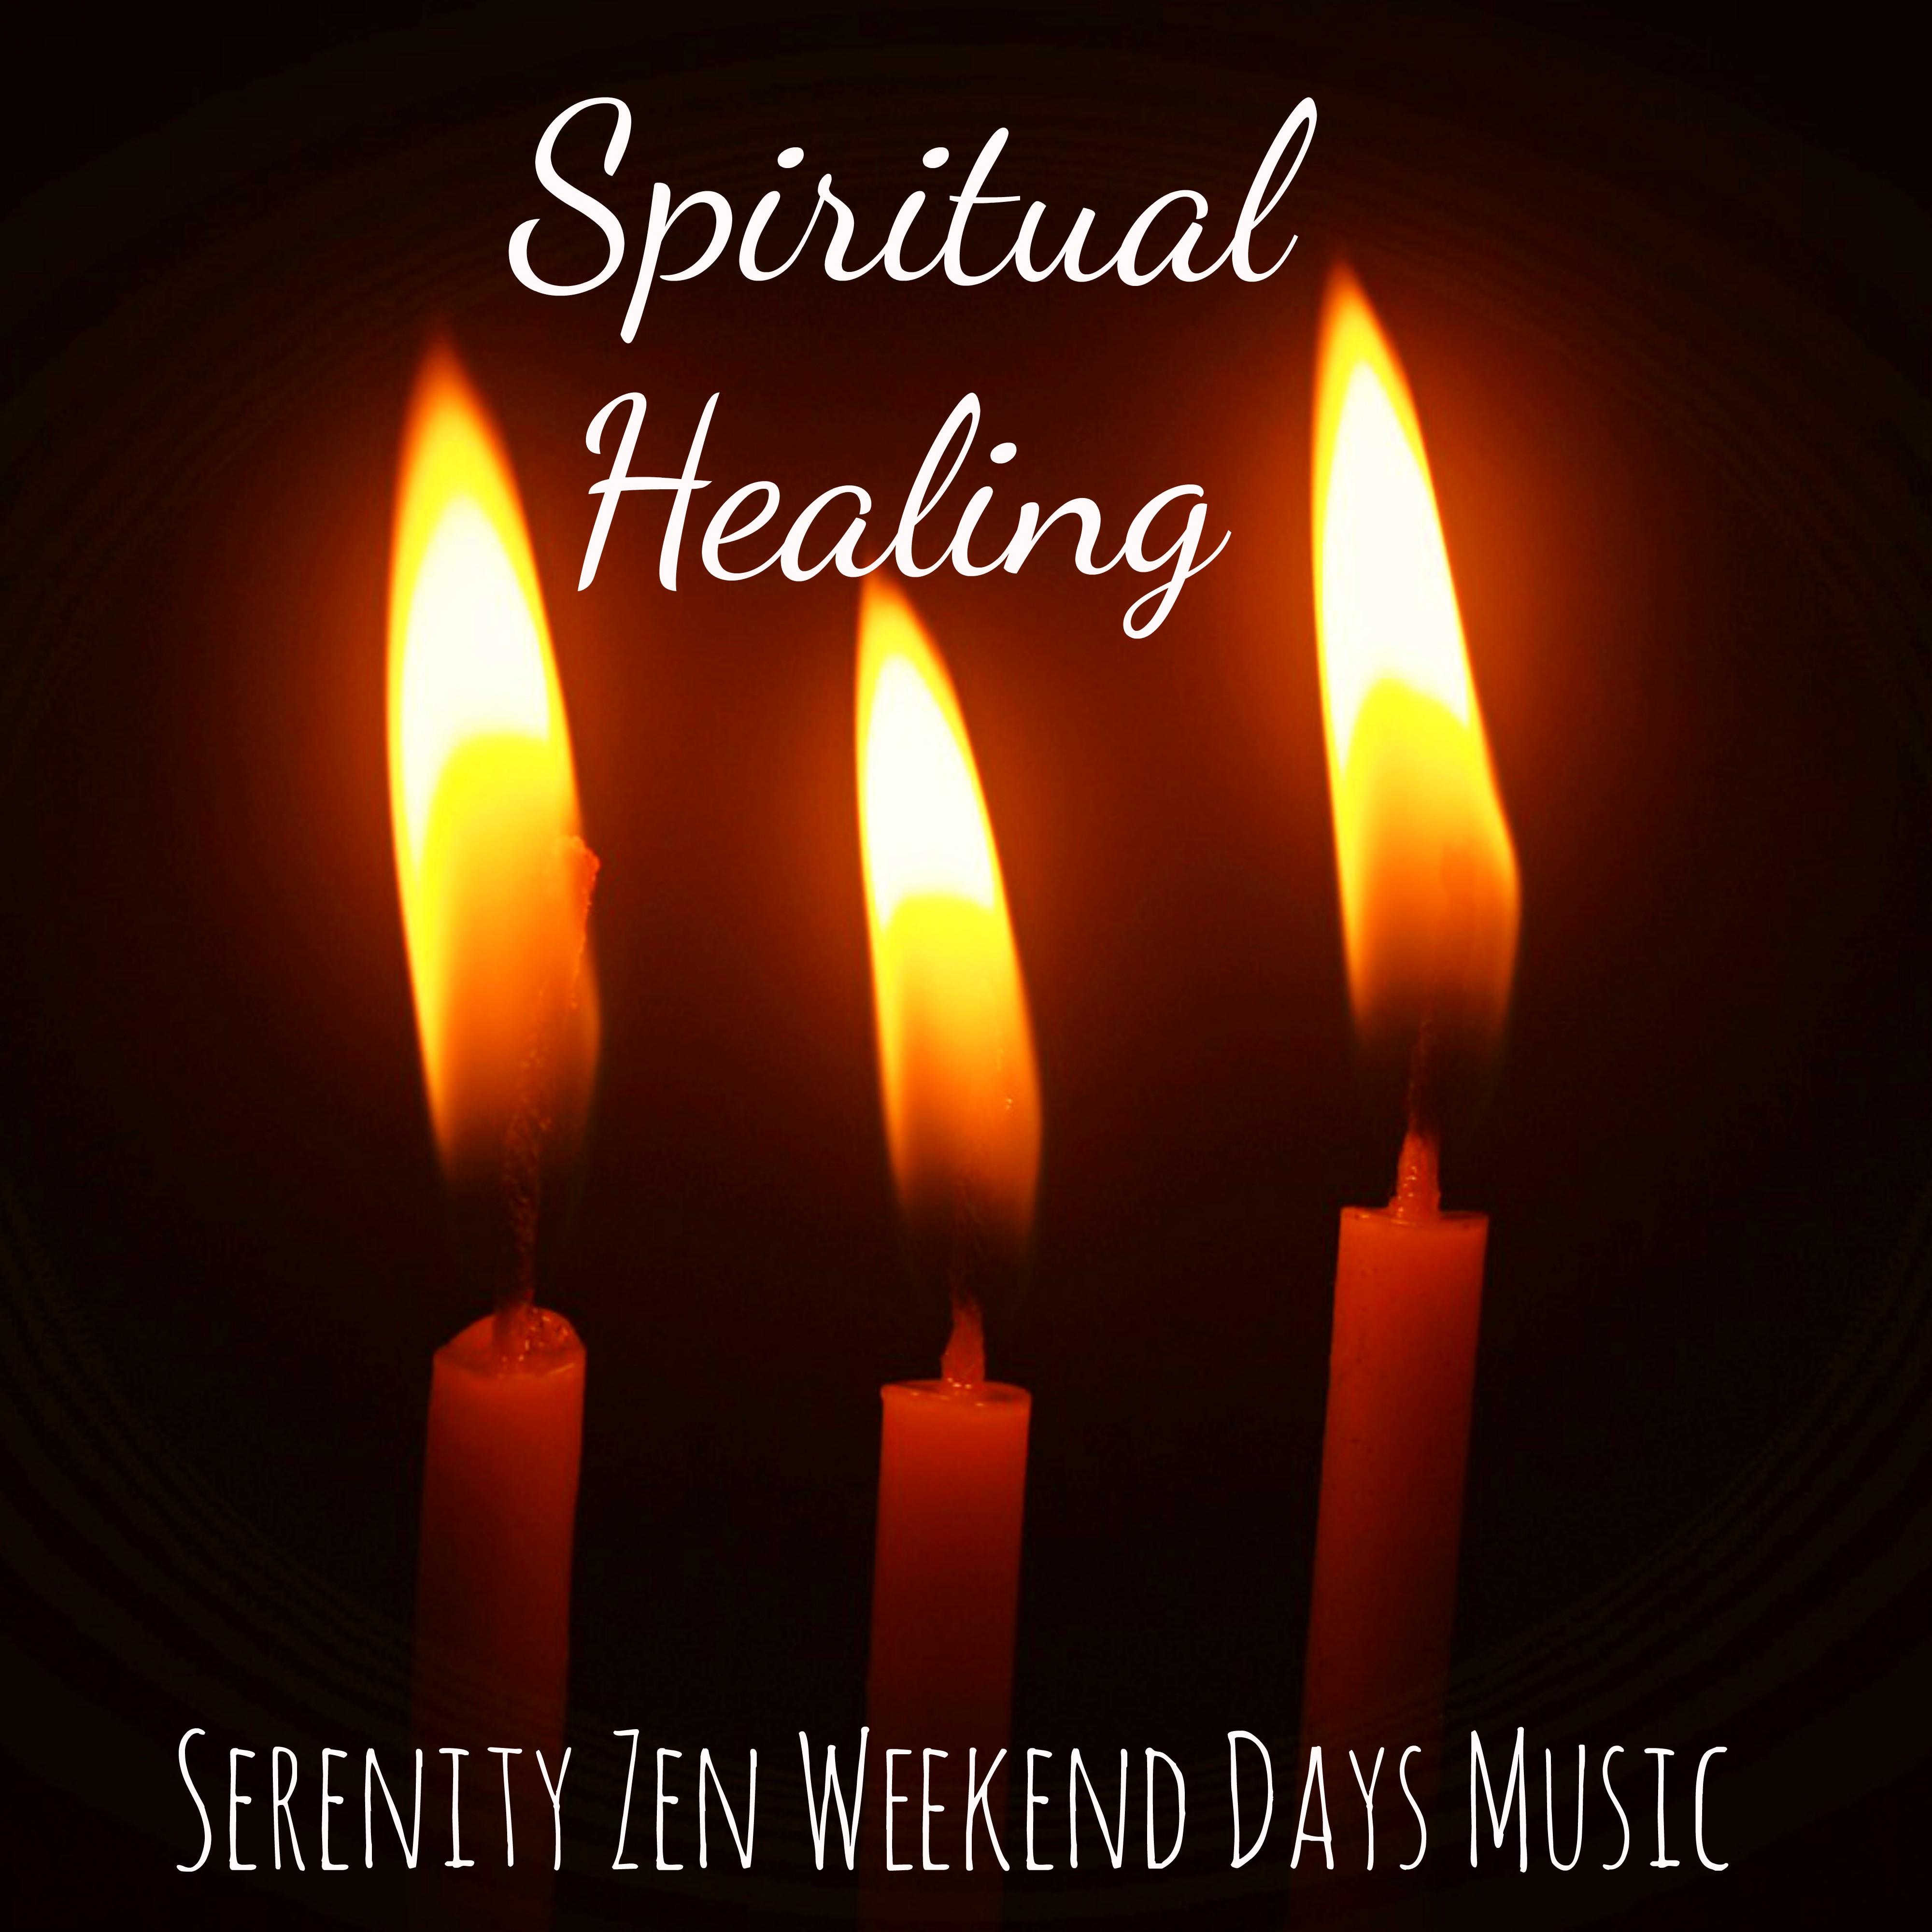 Spiritual Healing - Serenity Zen Weekend Days Music for Best Relaxation Mindfulness Exercises with Ambient New Age Healing Sounds